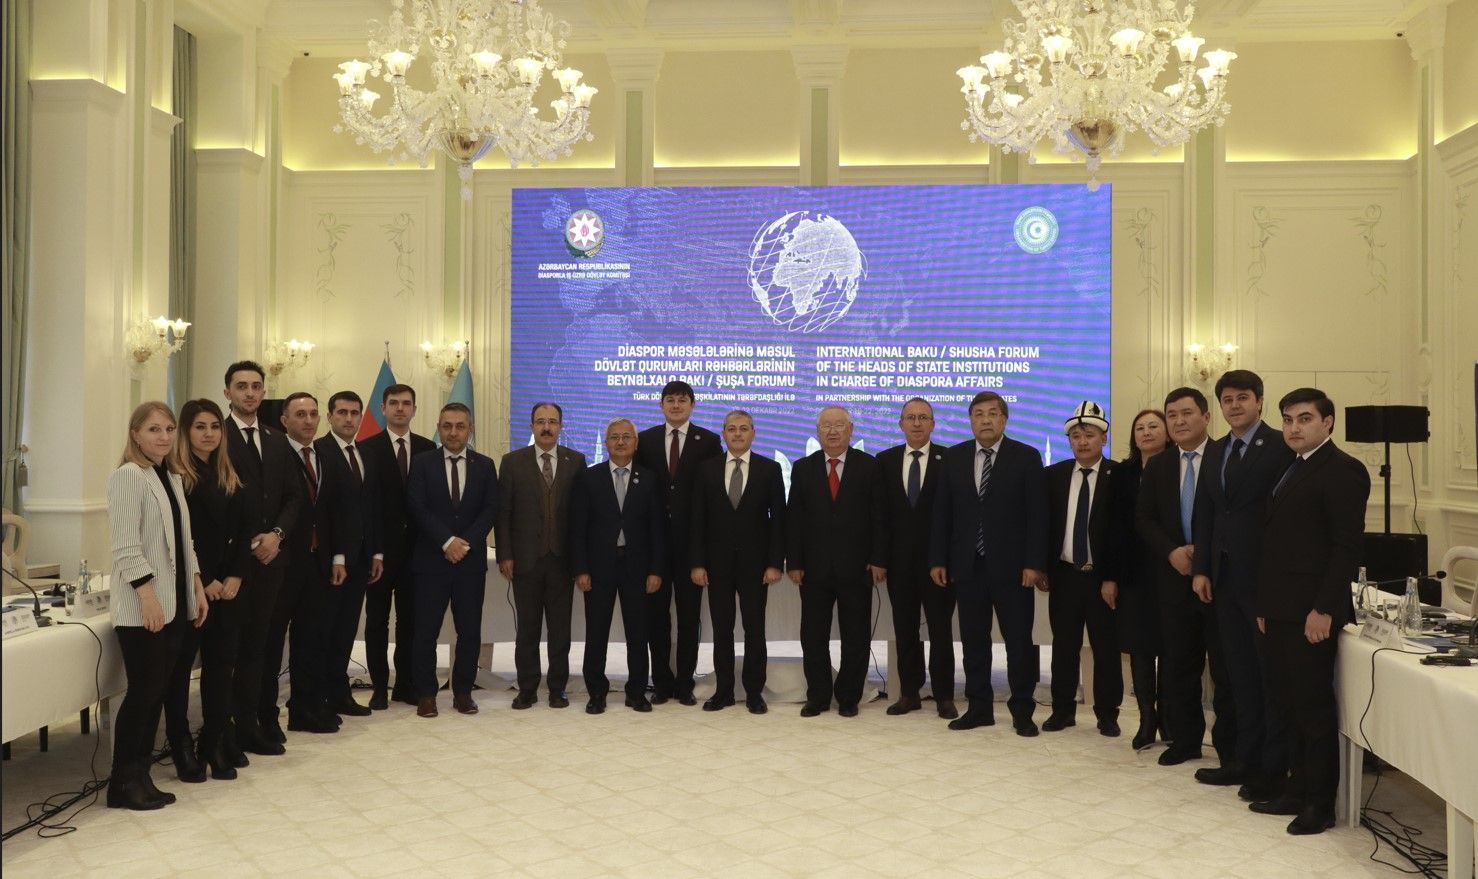 JOINT STATEMENT  by Participants of the "International Baku/Shusha Forum of Heads of State Institutions in Charge of Diaspora Affairs"